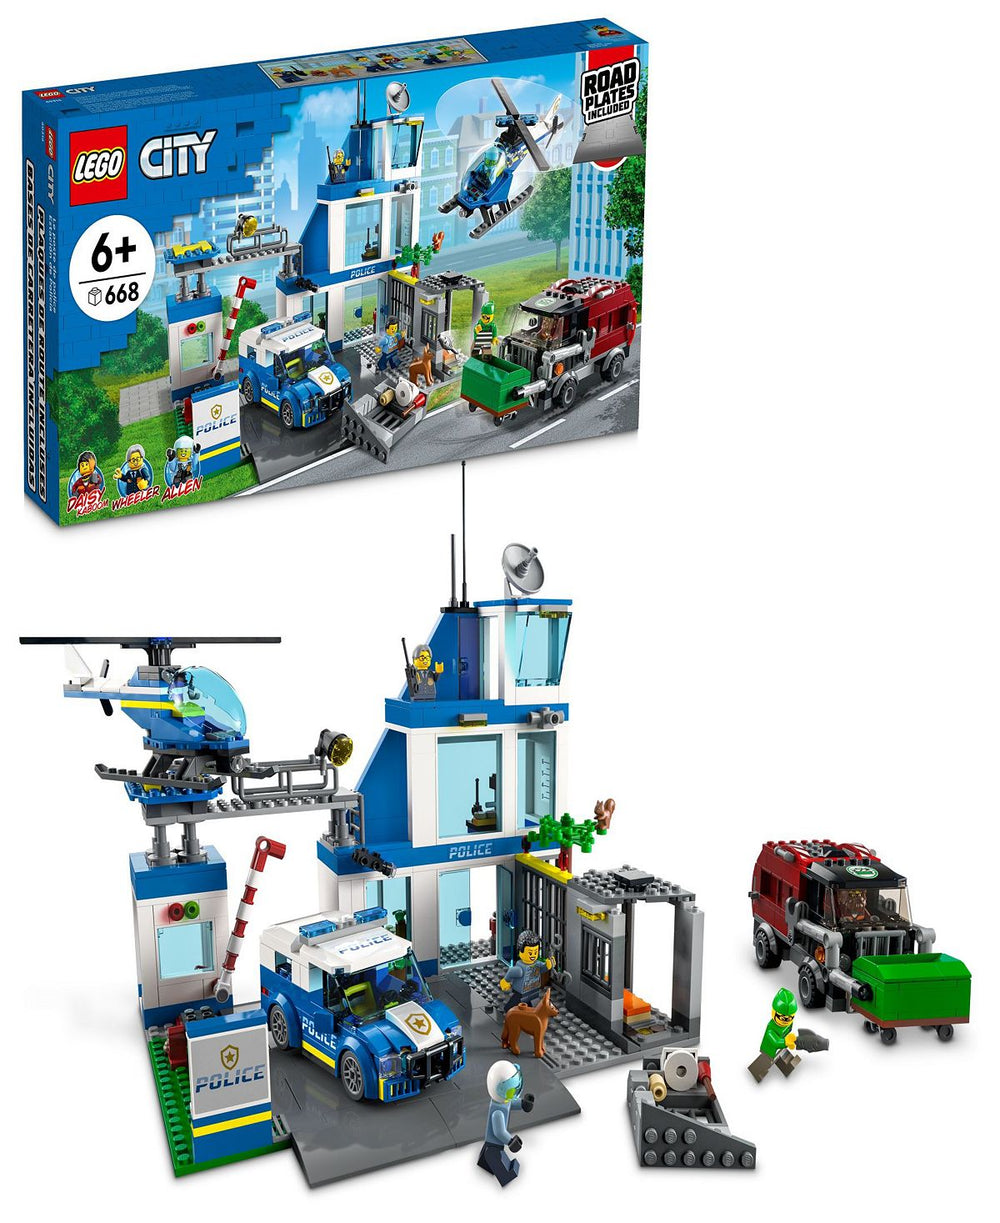 LEGO City Police Station 60316 Building Kit - 668 Pieces